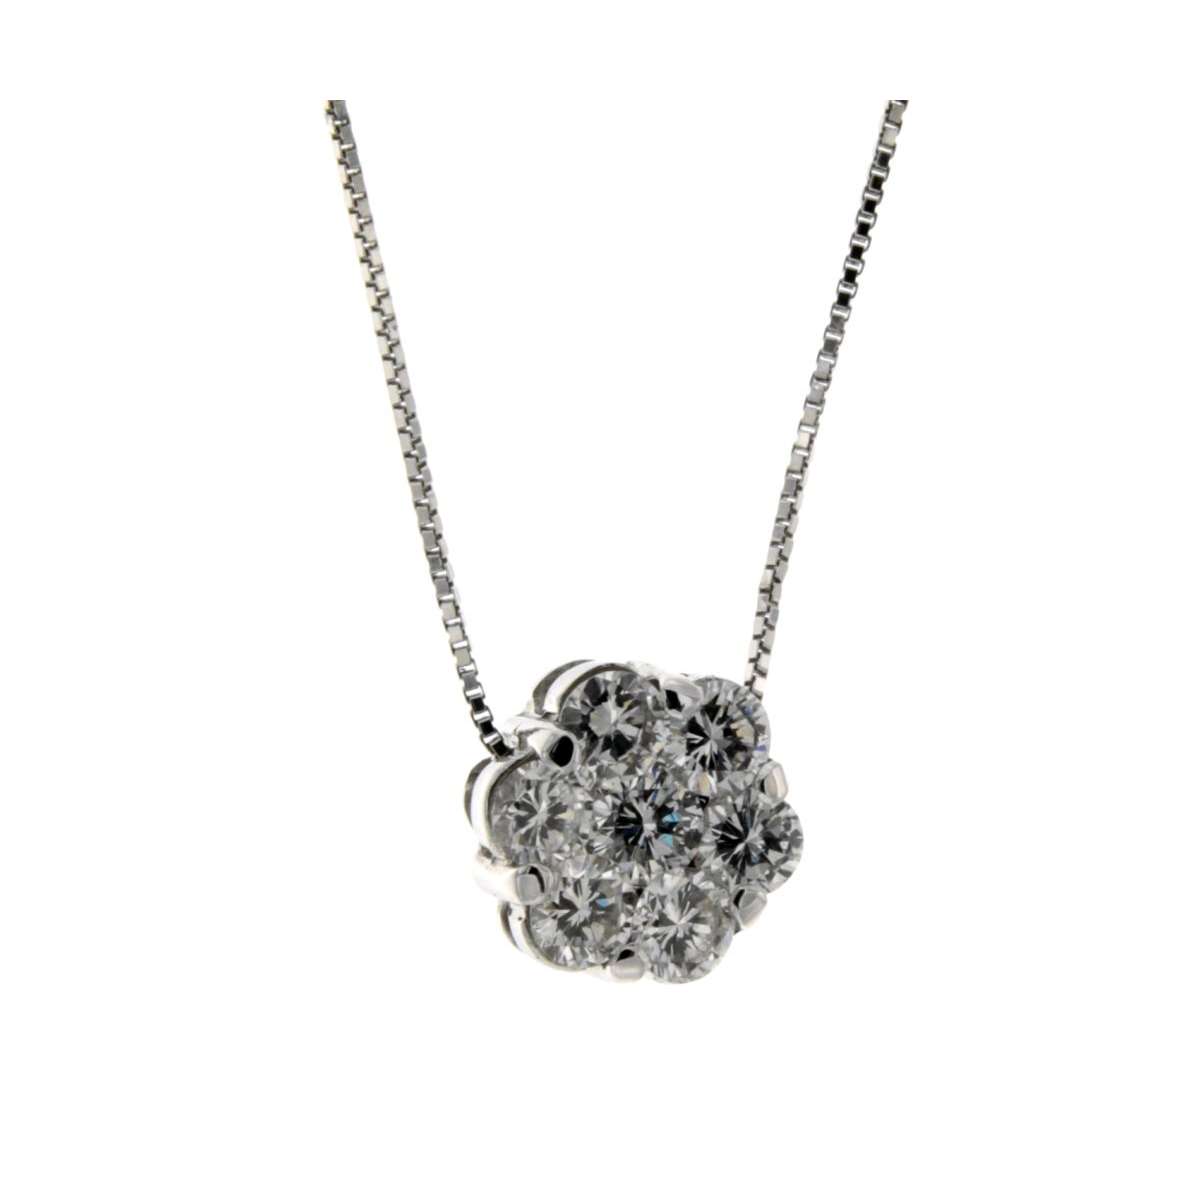 White gold fancy solitaire necklace 1.14 carats diamond G Color VVS1 clarity ideal for Christmas